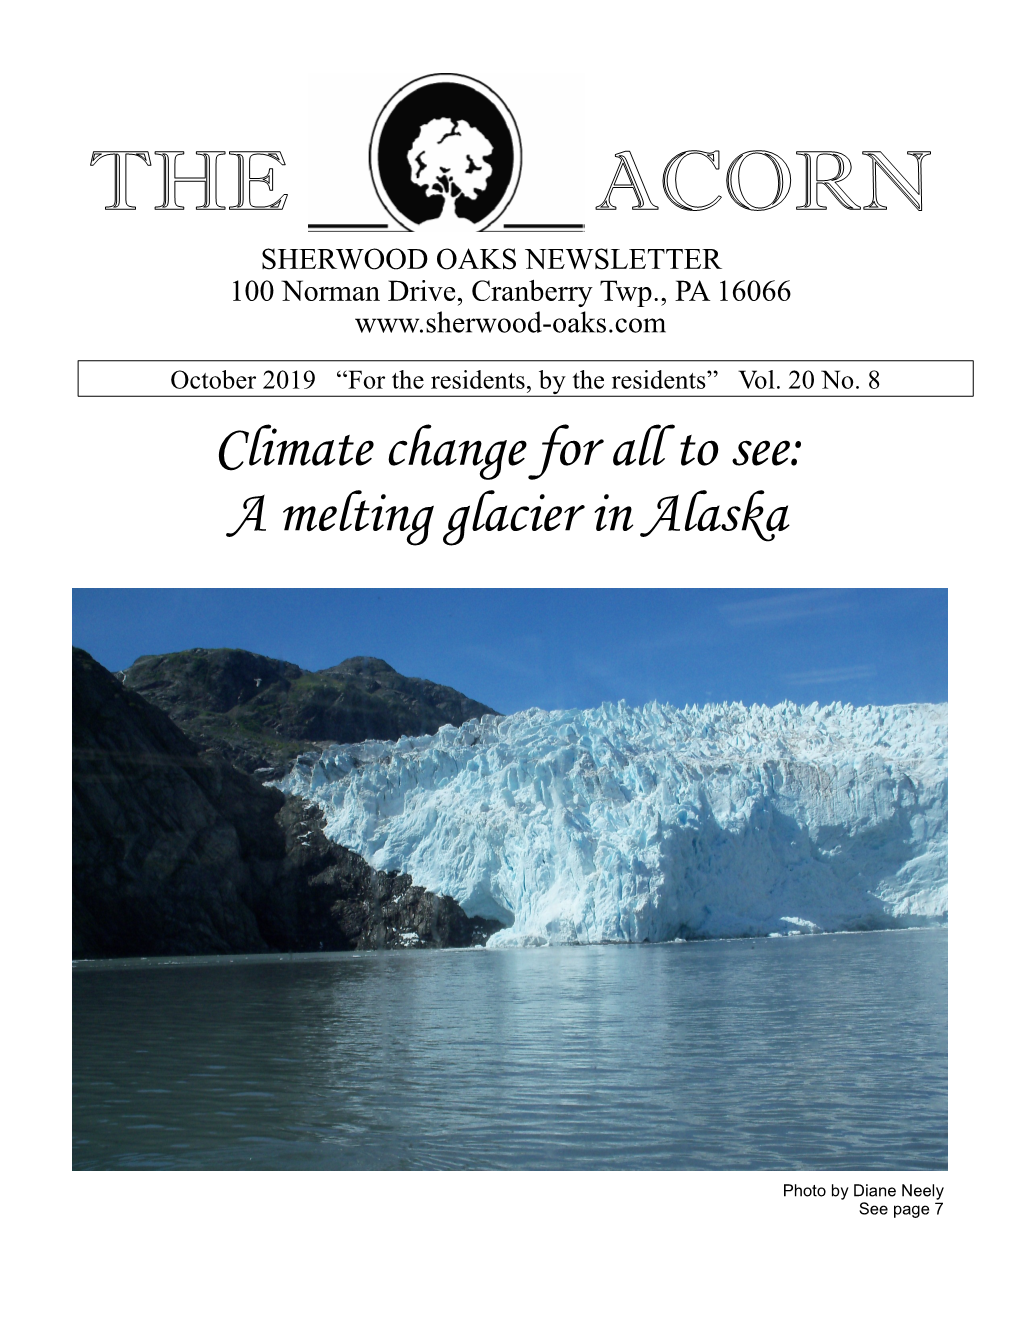 Climate Change for All to See: a Melting Glacier in Alaska